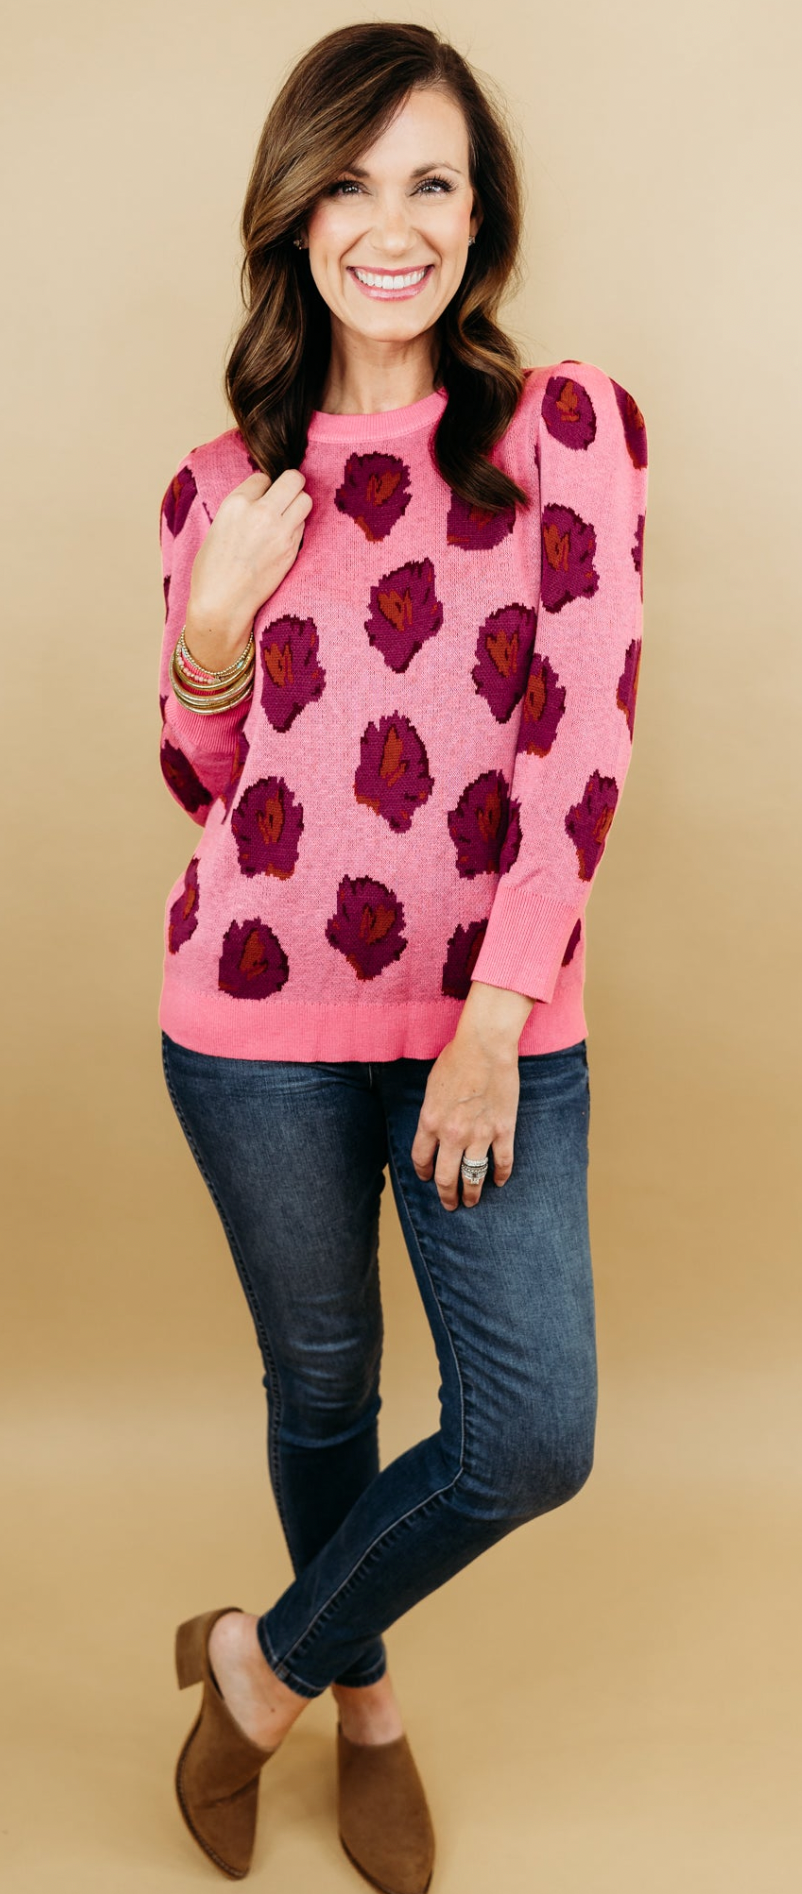 The Bixby Sweater in Pink Bloom by Crosby